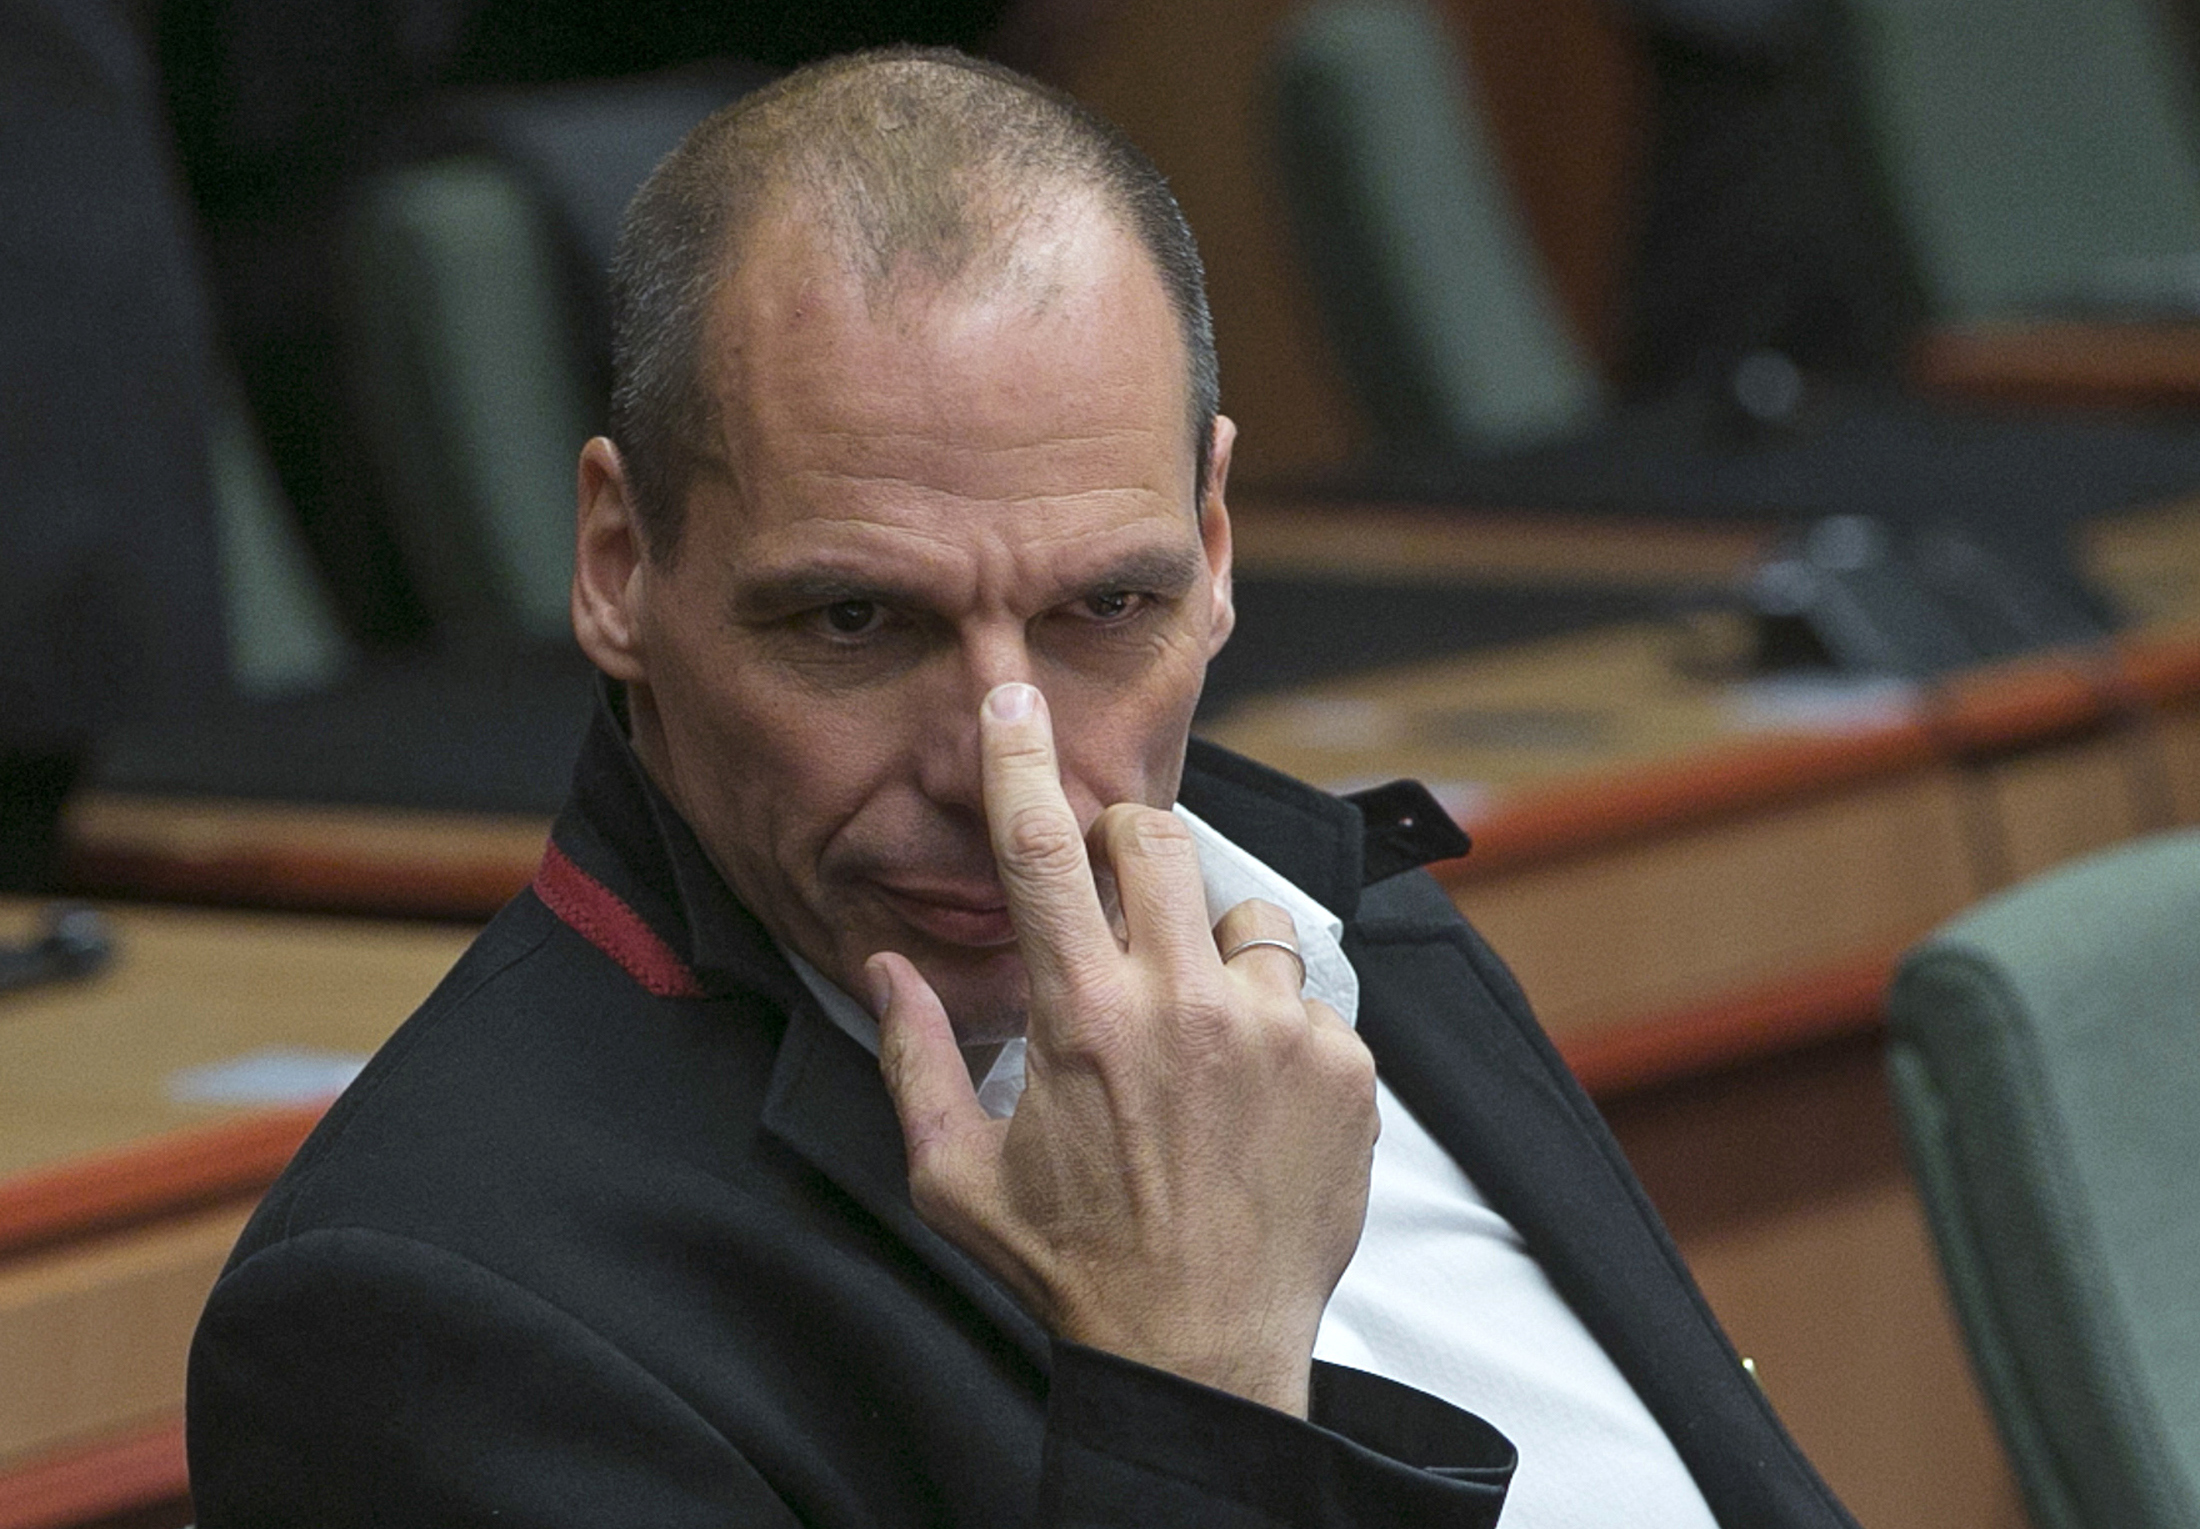 Greek Finance Minister Yanis Varoufakis waits for the start of an extraordinary euro zone Finance Ministers meeting (Eurogroup) to discuss Athens' plans to reverse austerity measures agreed as part of its bailout, in Brussels February 20, 2015. Greece has made every effort to reach a mutually beneficial agreement with its euro zone partners but will not be pushed to implement its old bailout programme, its government spokesman said on Friday.  REUTERS/Yves Herman (BELGIUM - Tags: POLITICS BUSINESS TPX IMAGES OF THE DAY) - RTR4QGAY